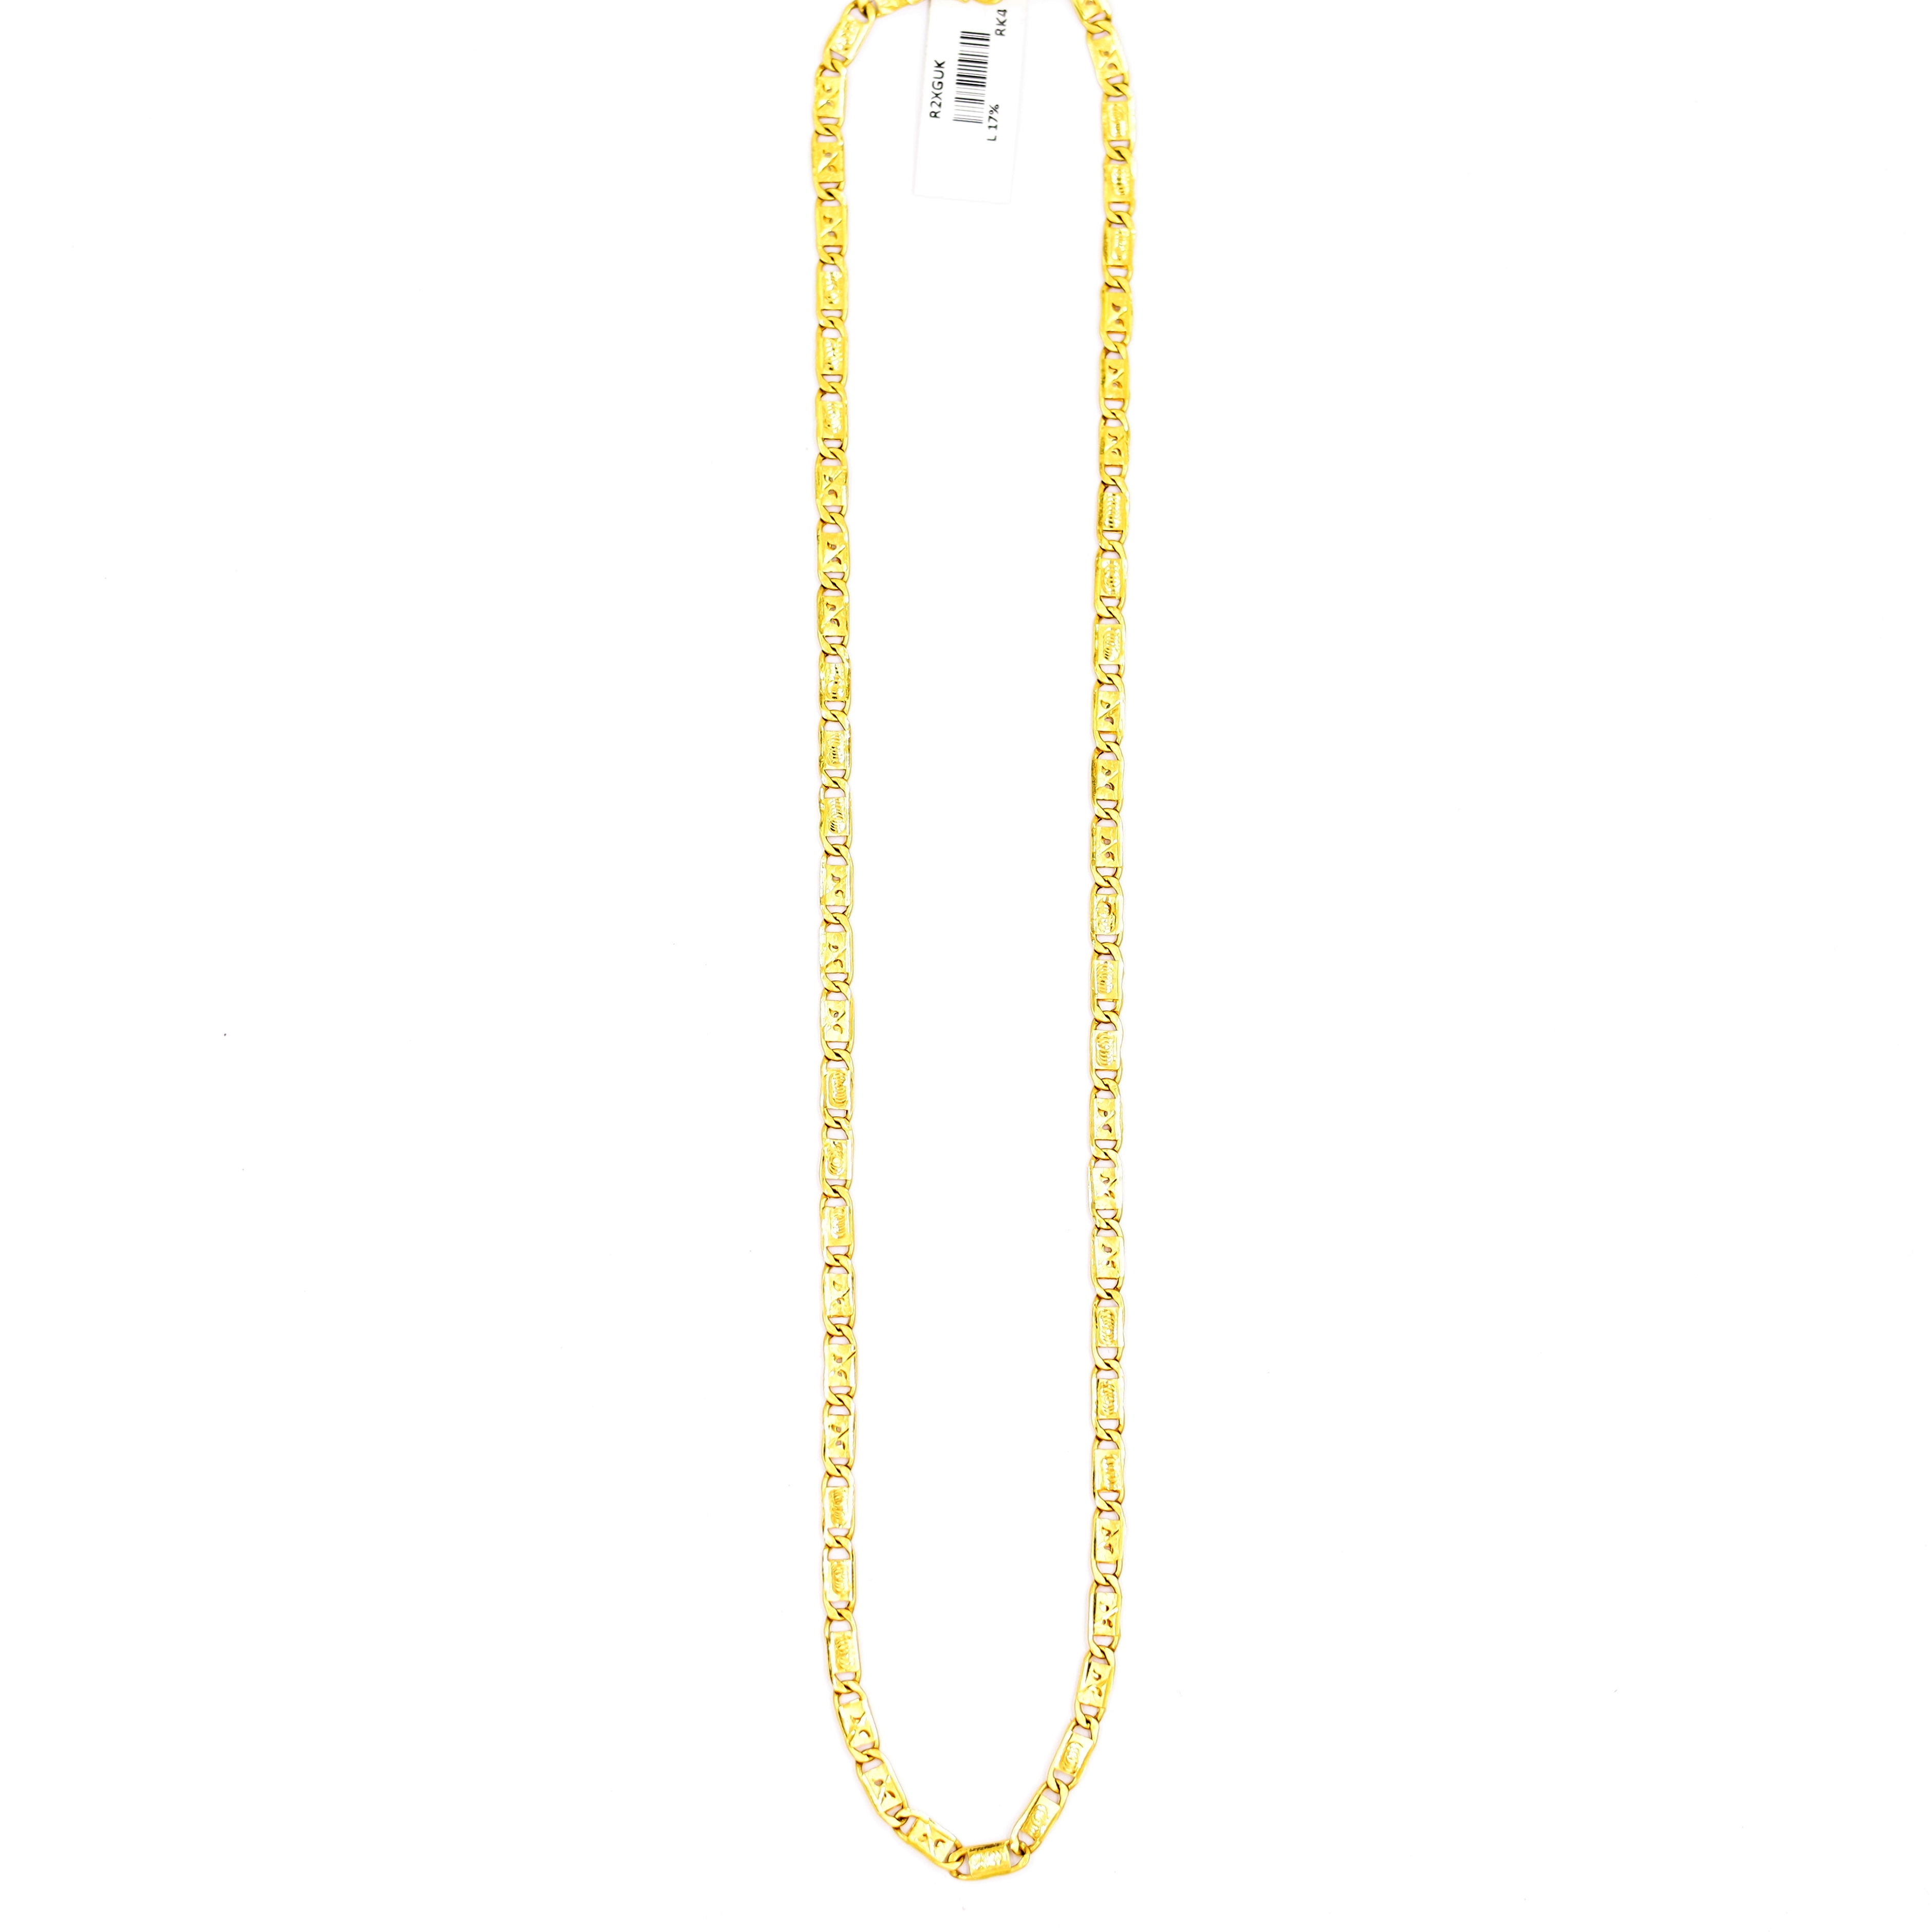 Edgy Hollow Gold Chain For Men